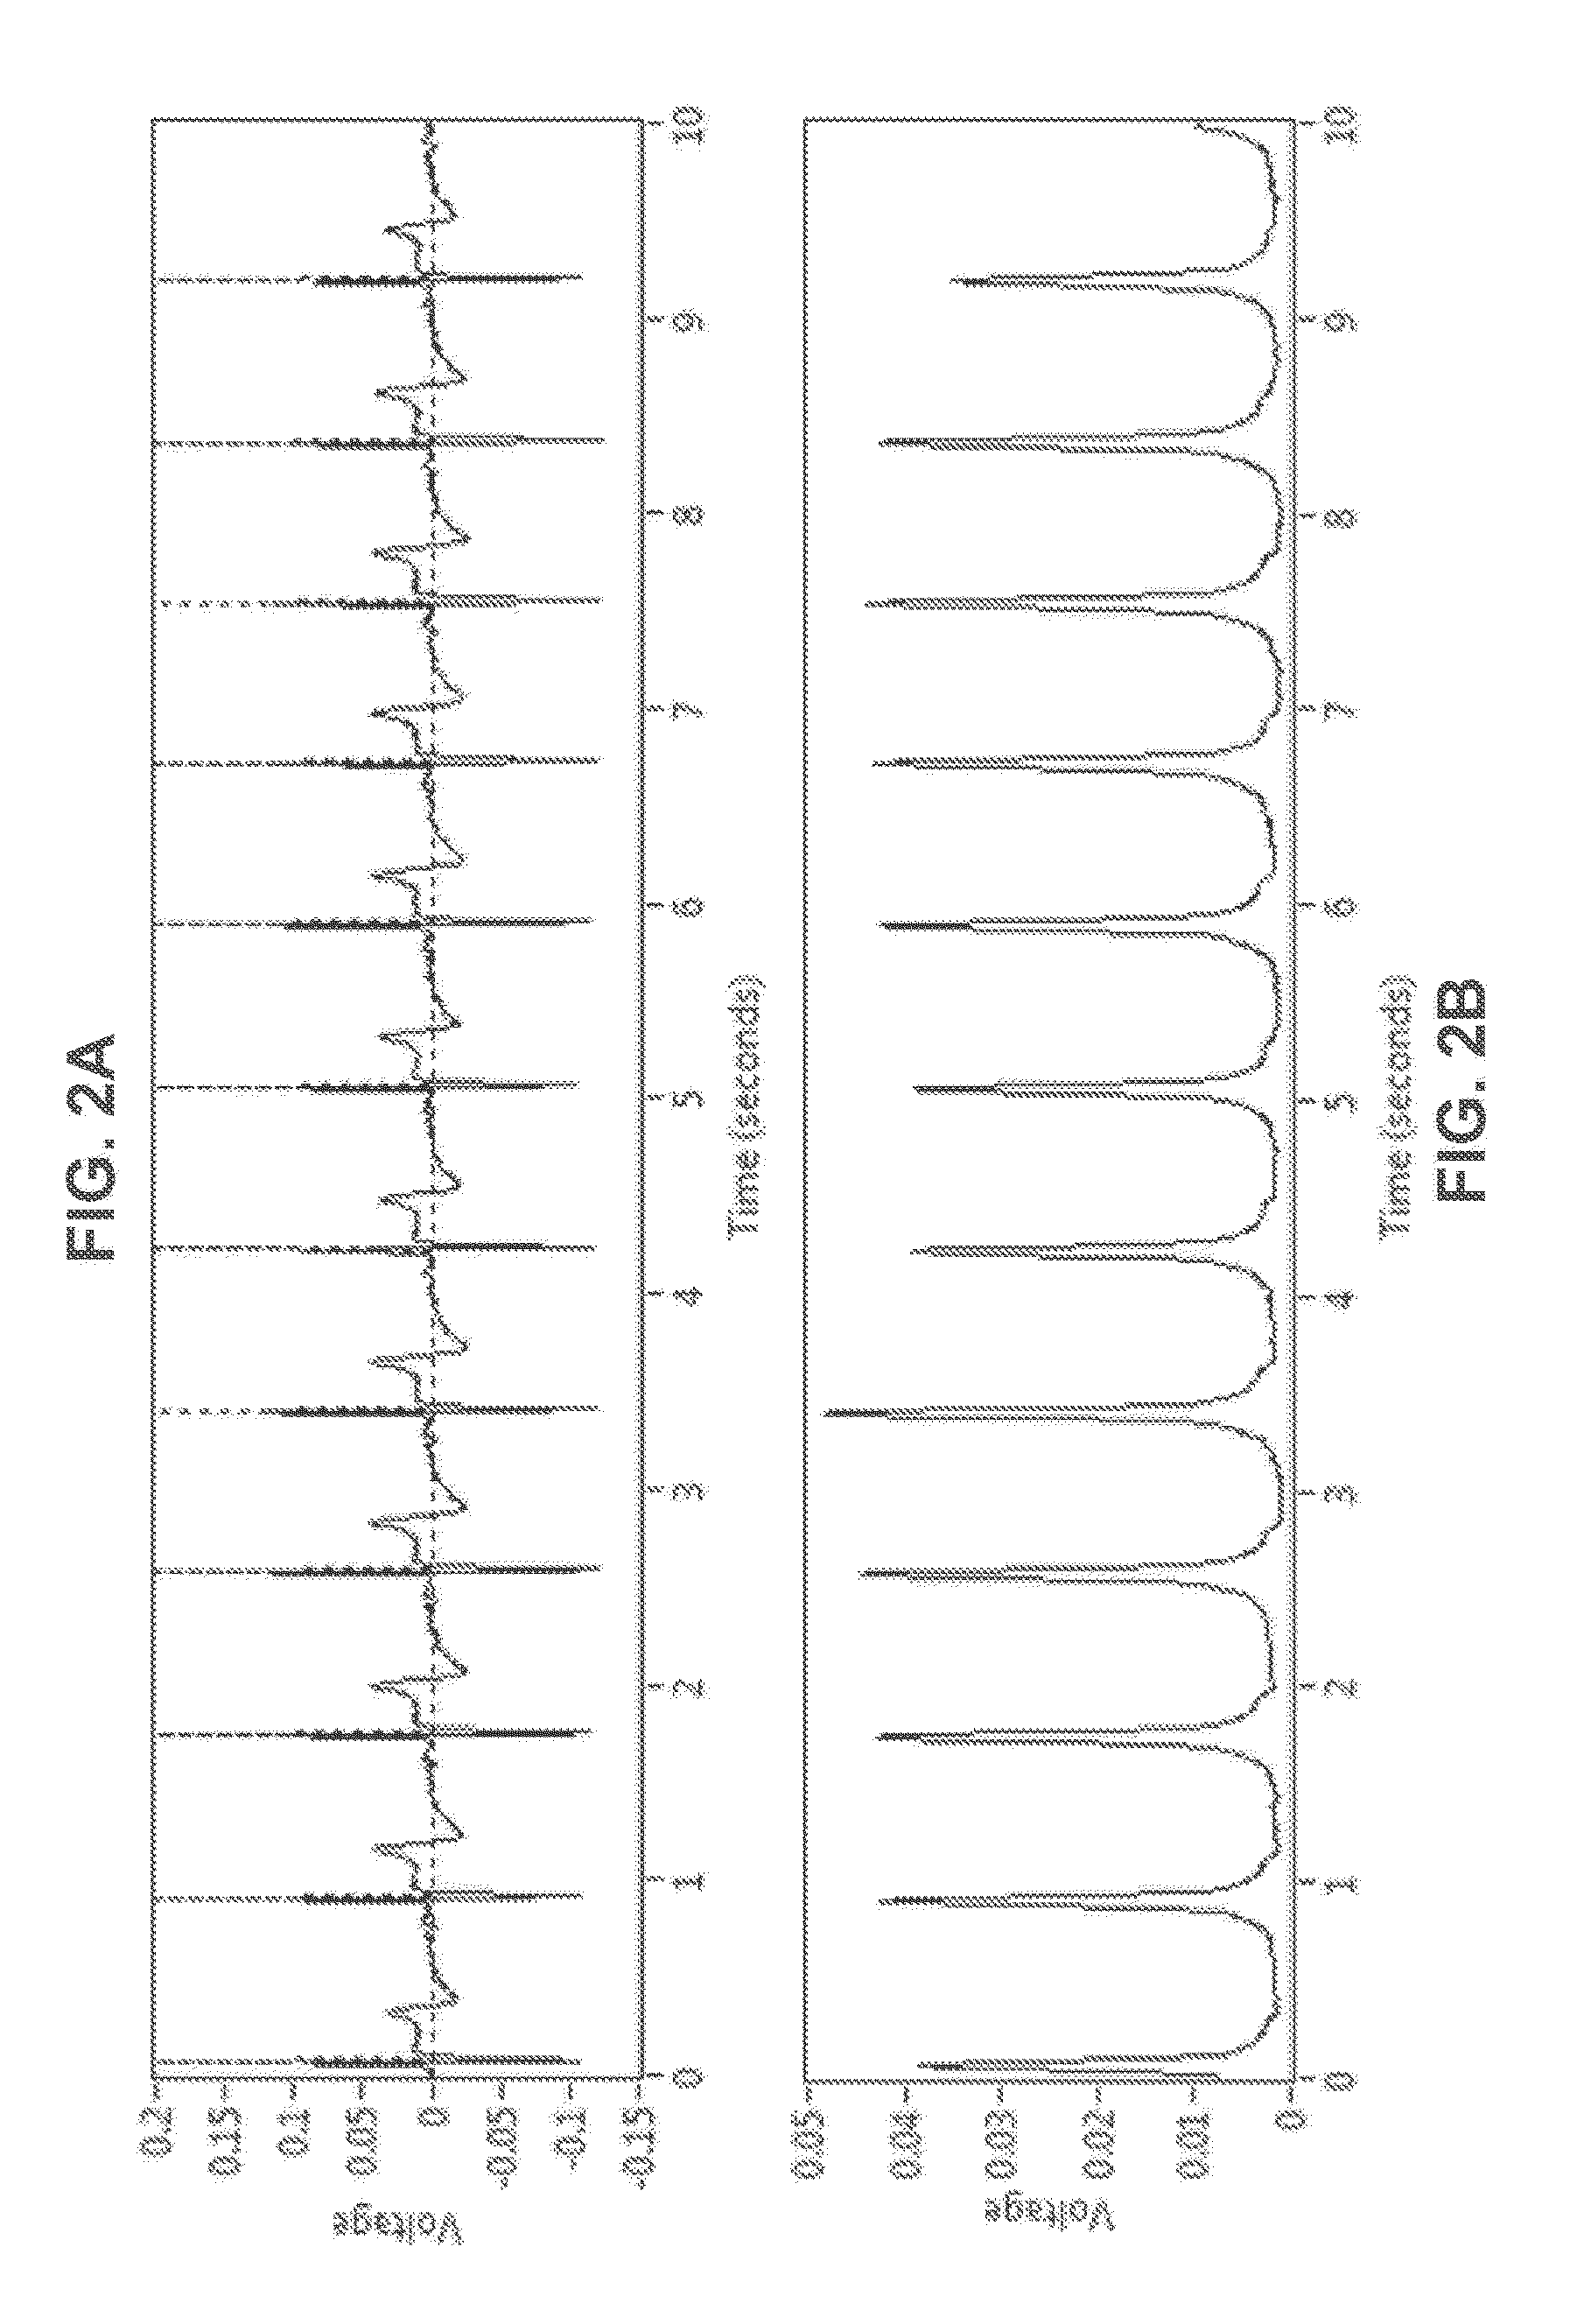 Access needle with direct visualization and related methods